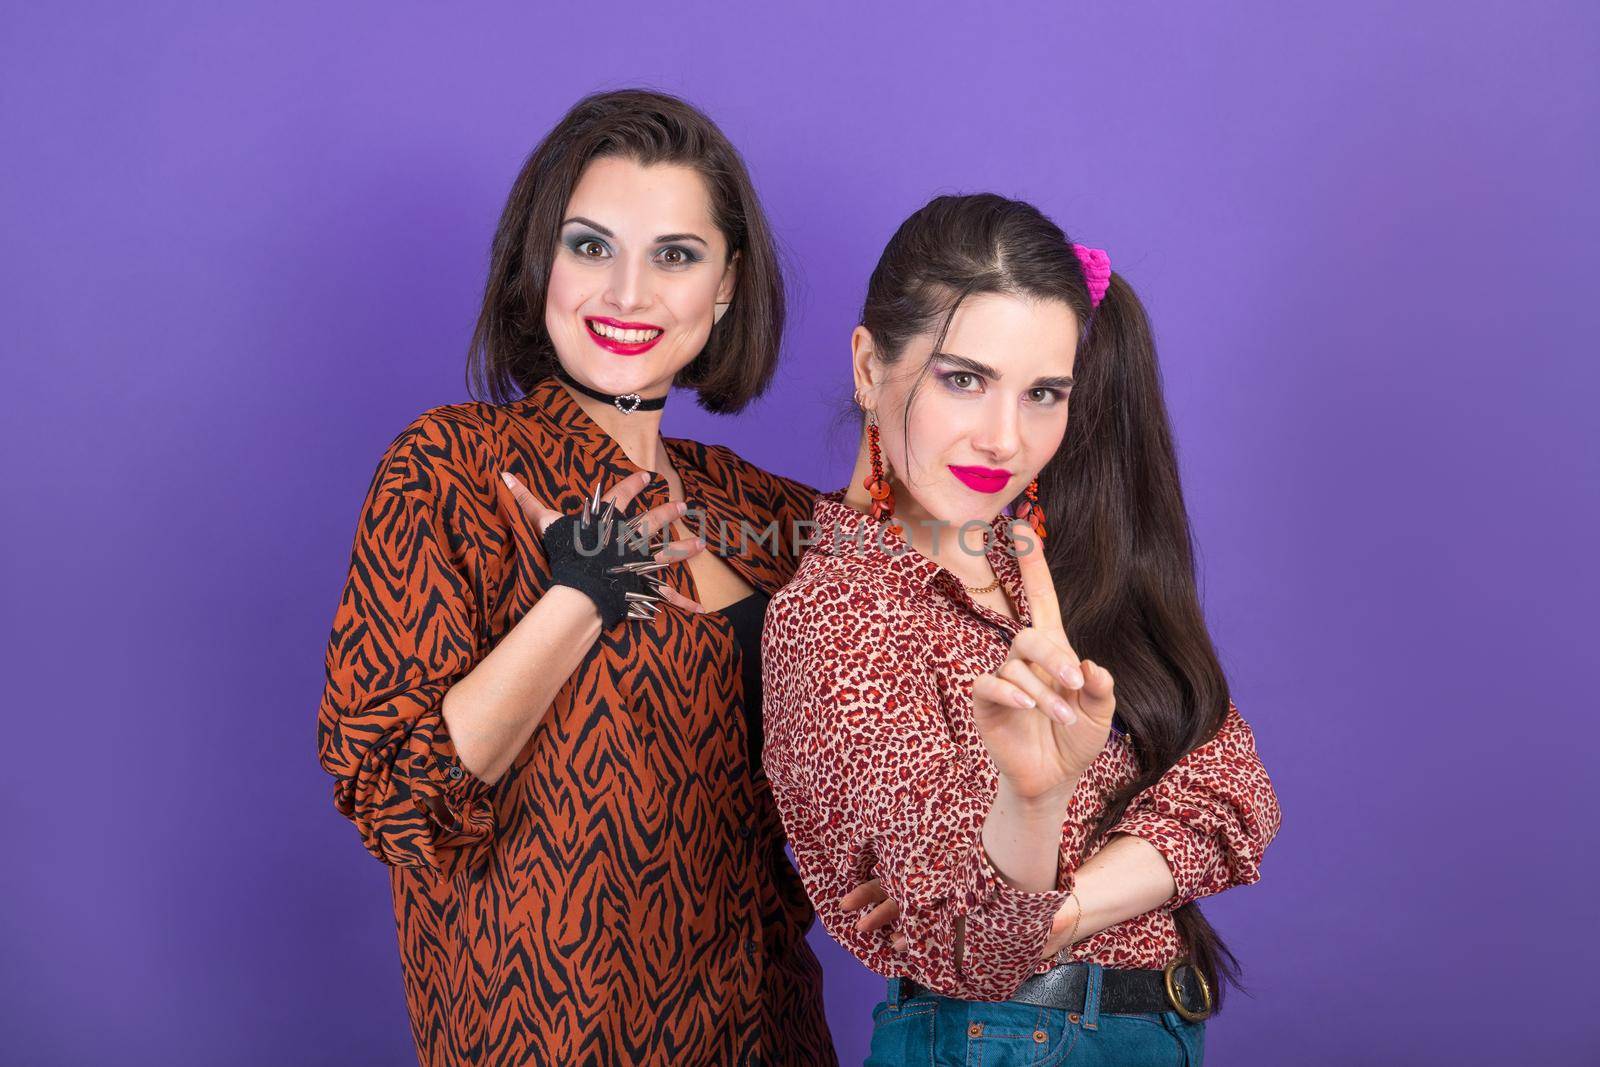 Party in retro 80s style. Two young women on blue background.